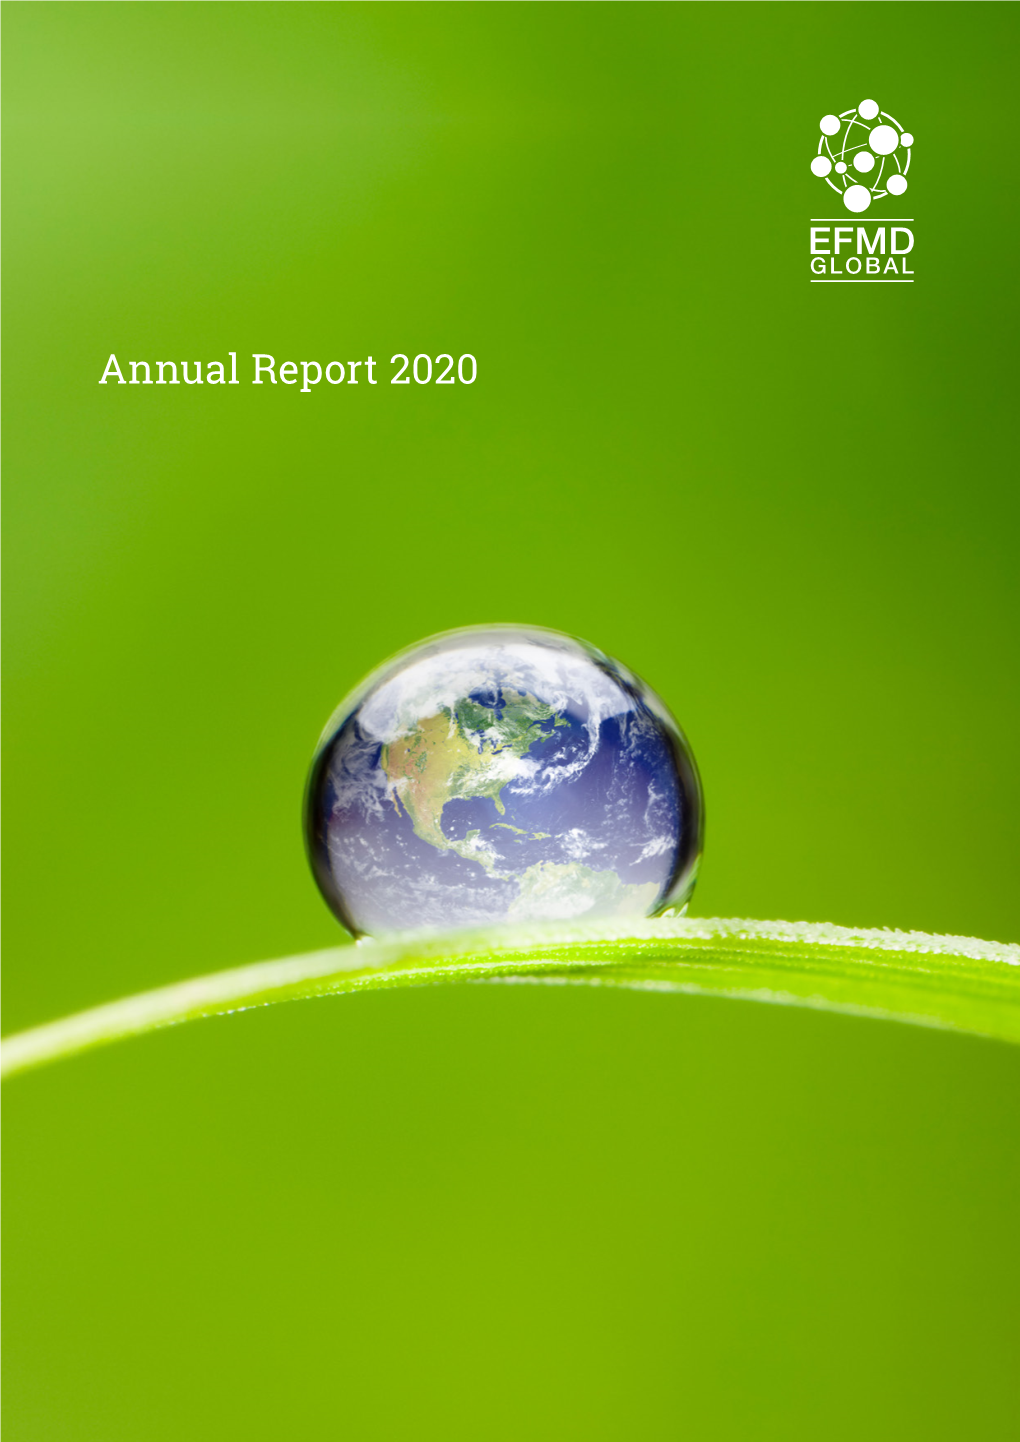 Annual Report 2020 Coming Through the Crisis to Better and Happier Times Coming Through the Crisis to Better and Happier Times